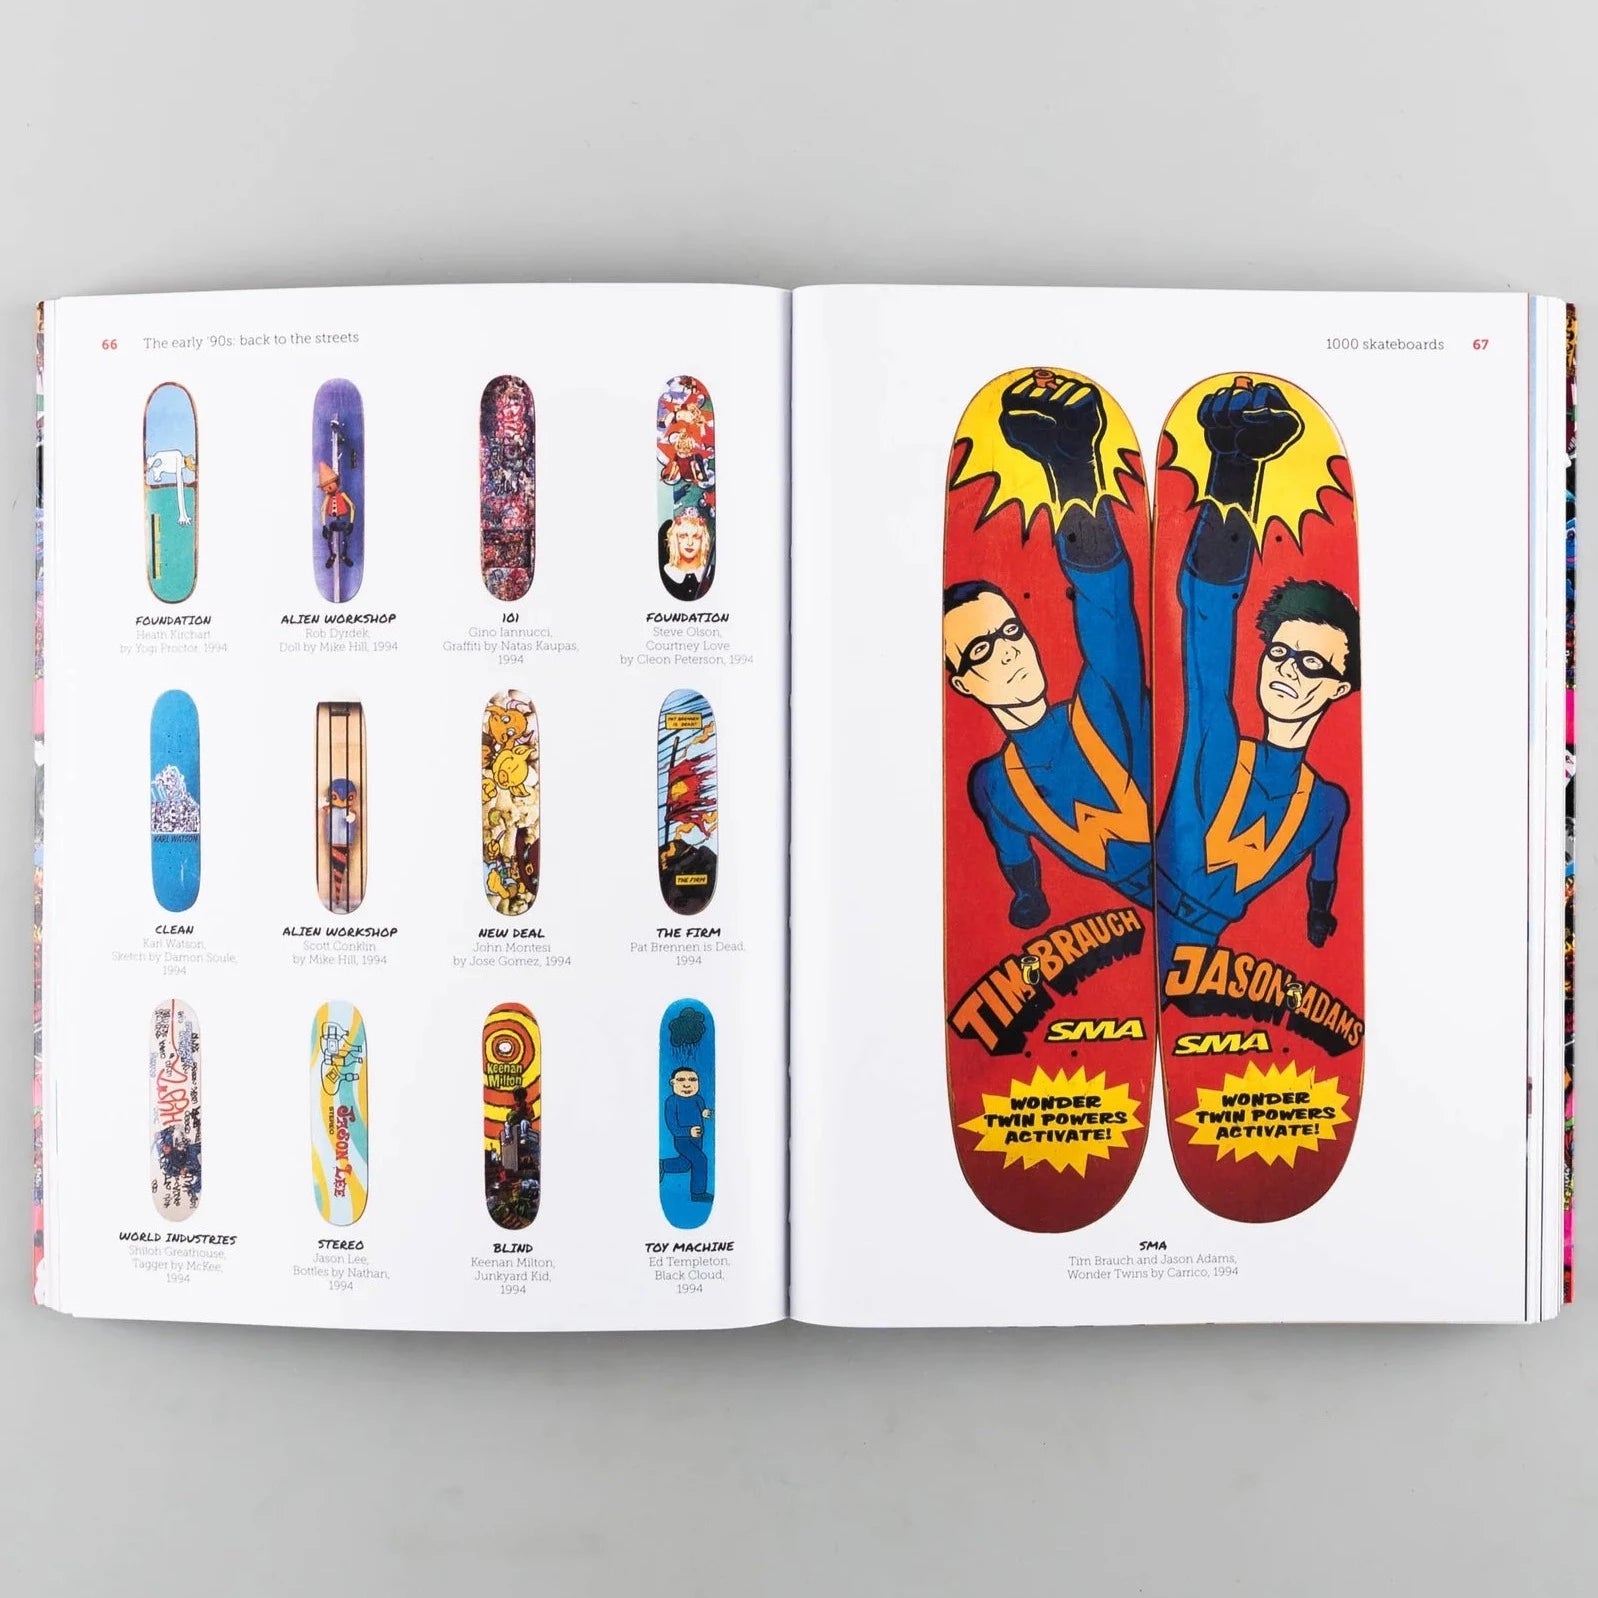 Inside of a book showing diagrams of skateboards